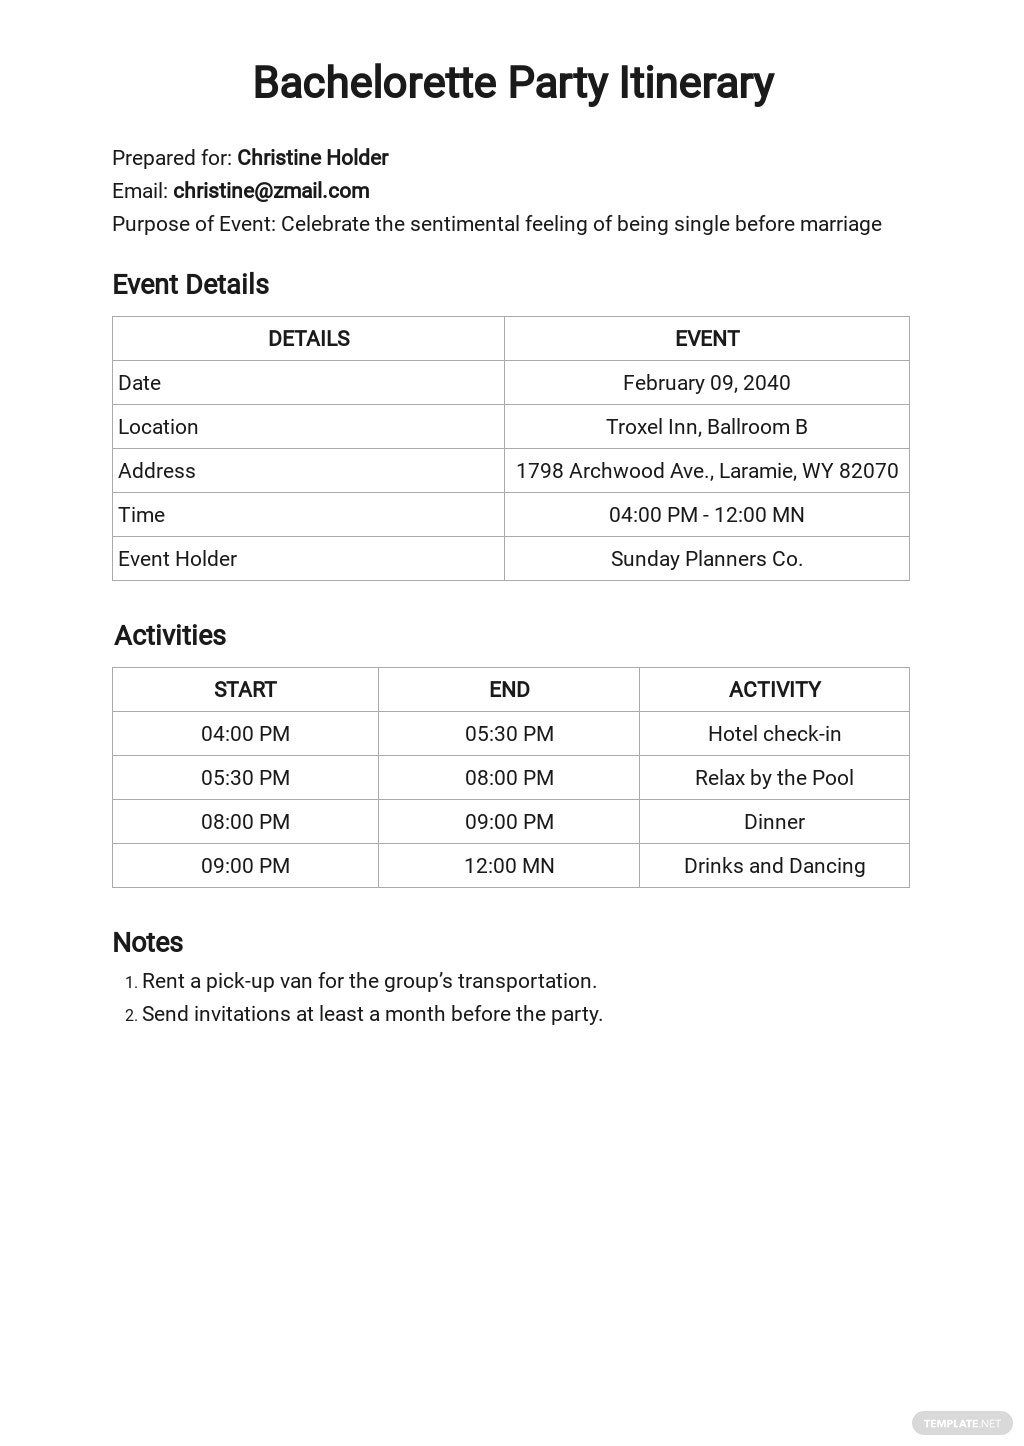 bachelorette-party-itinerary-template